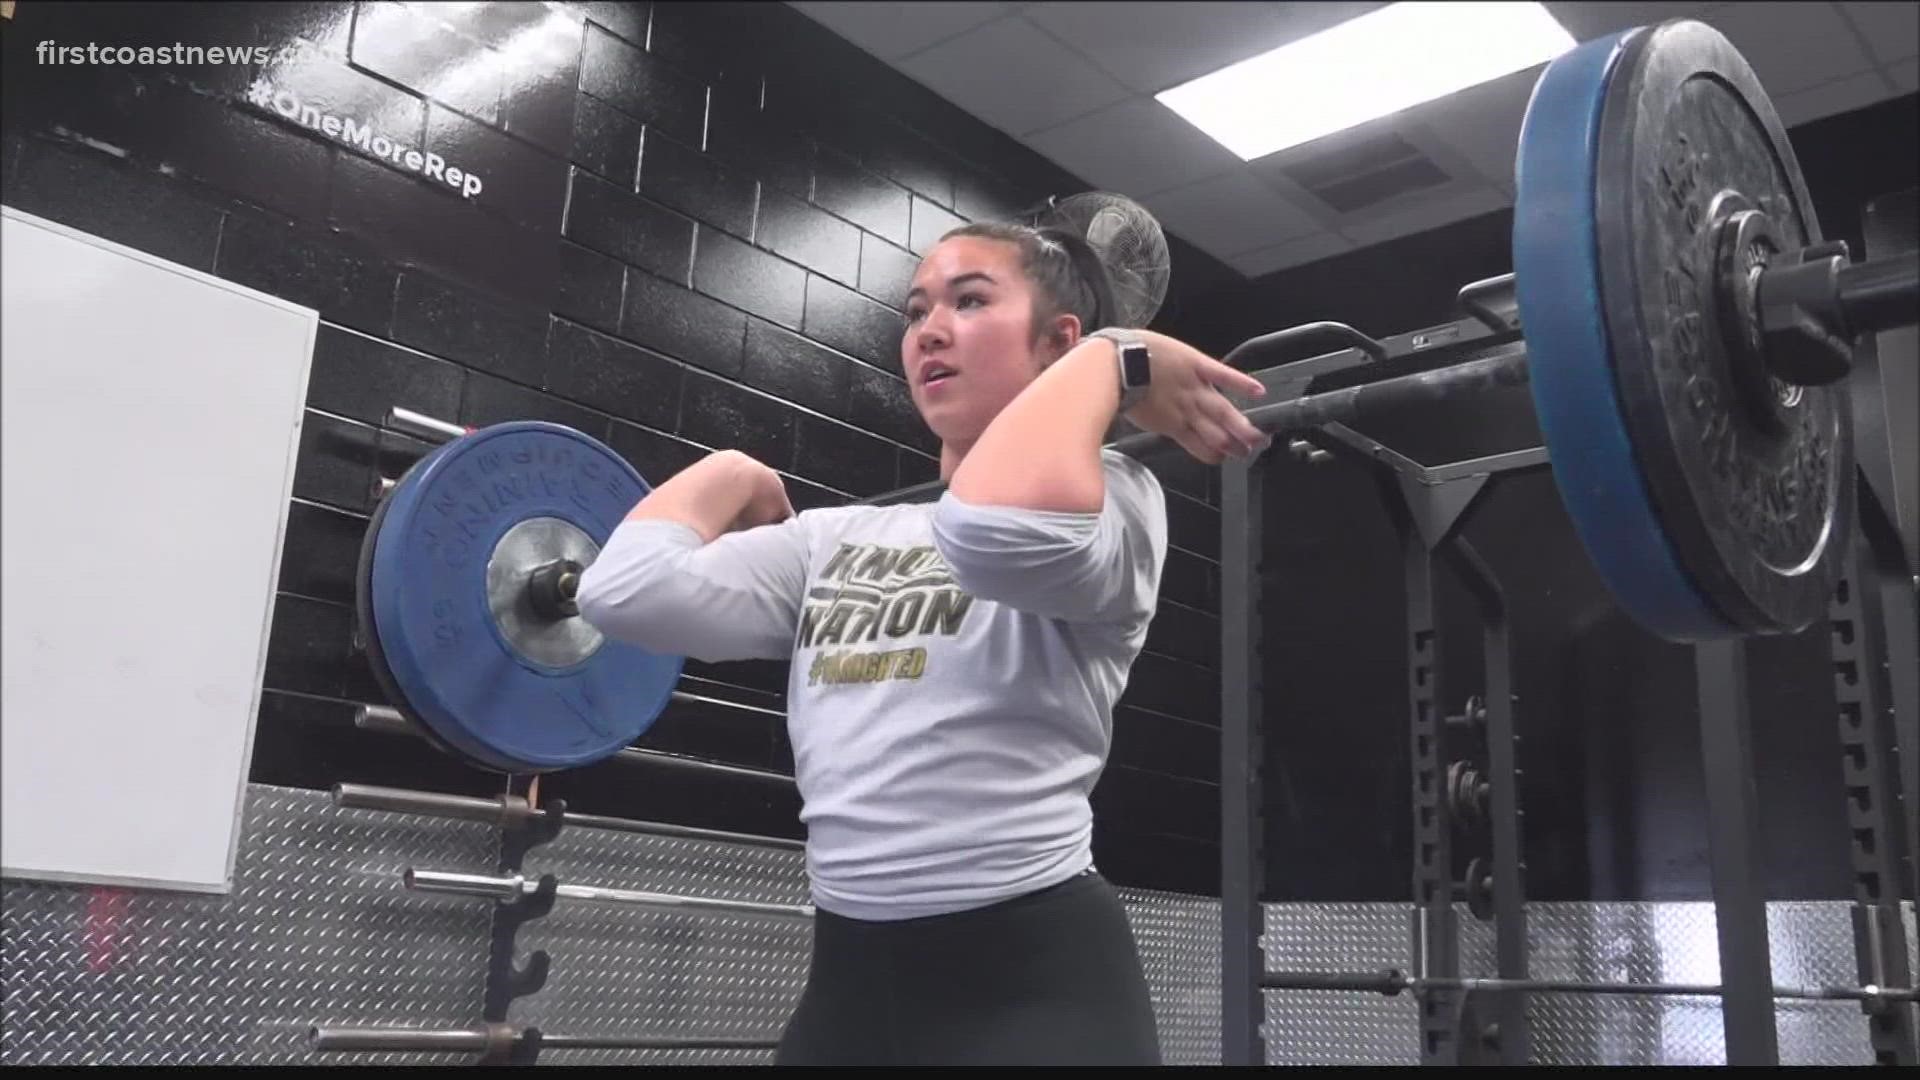 Ivy Gunn started her athletic career at Oakleaf as a cheerleader. Now, she's competing for a state championship in weightlifting.